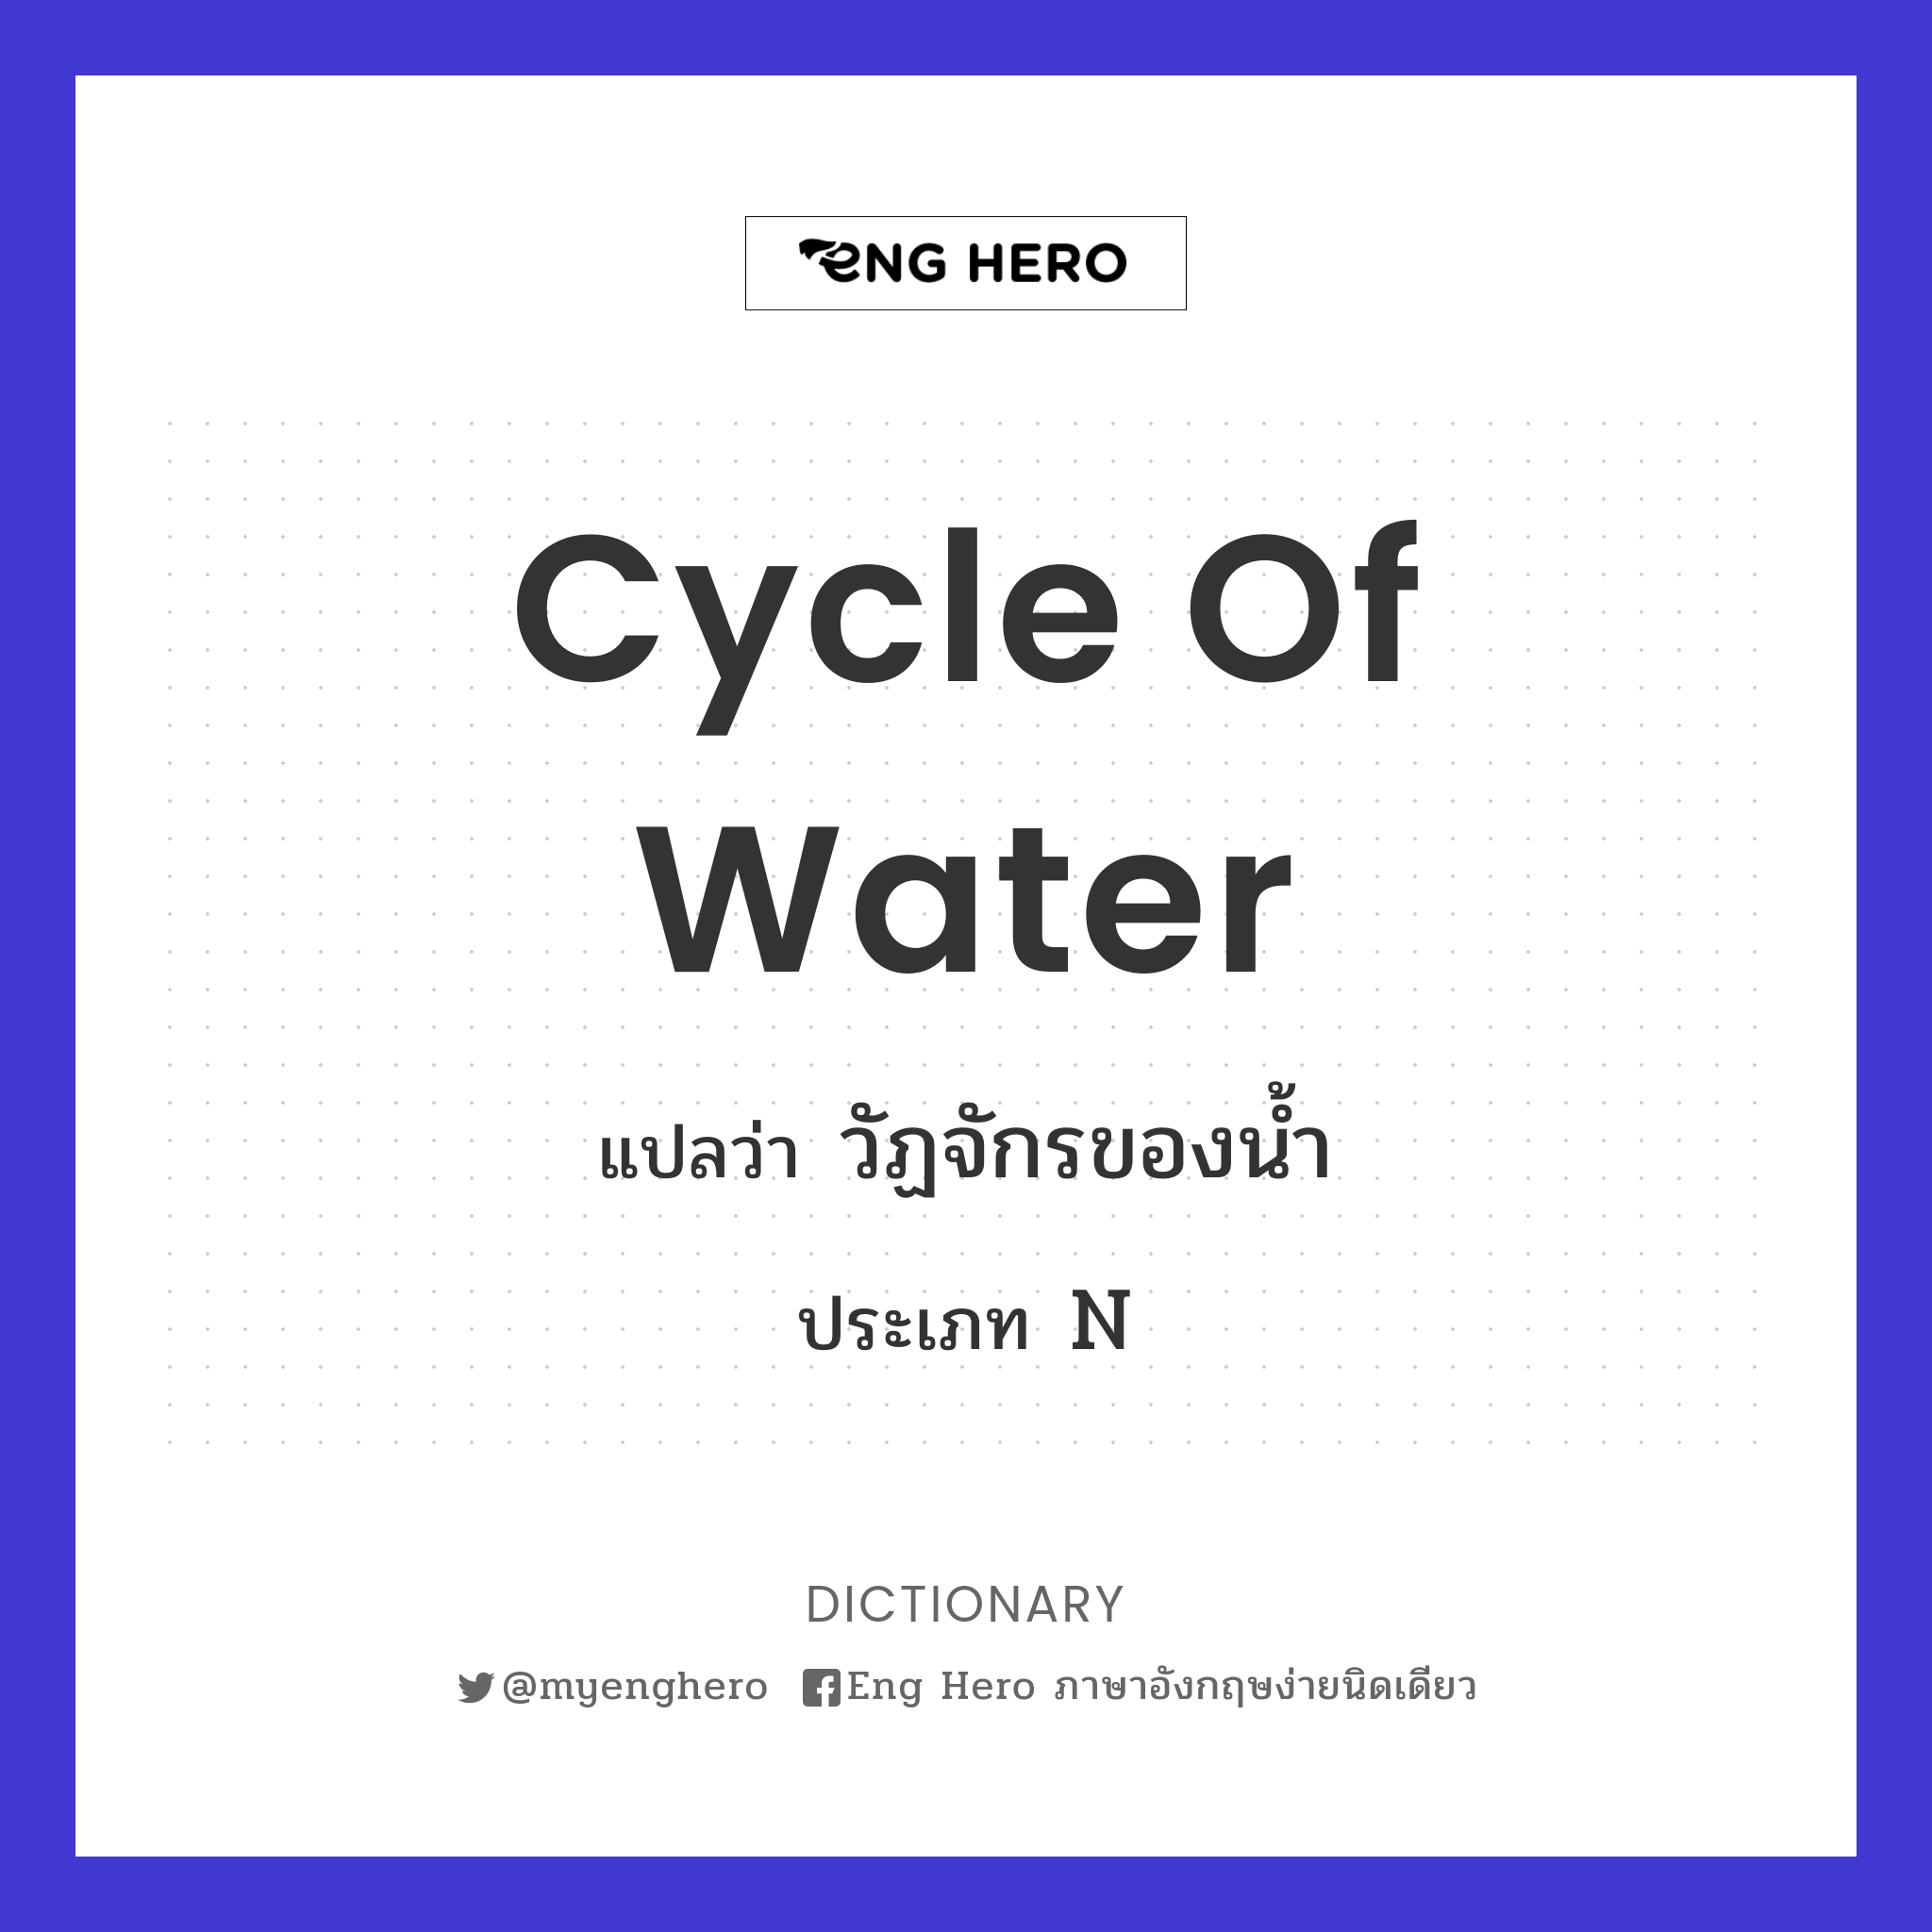 Cycle of Water